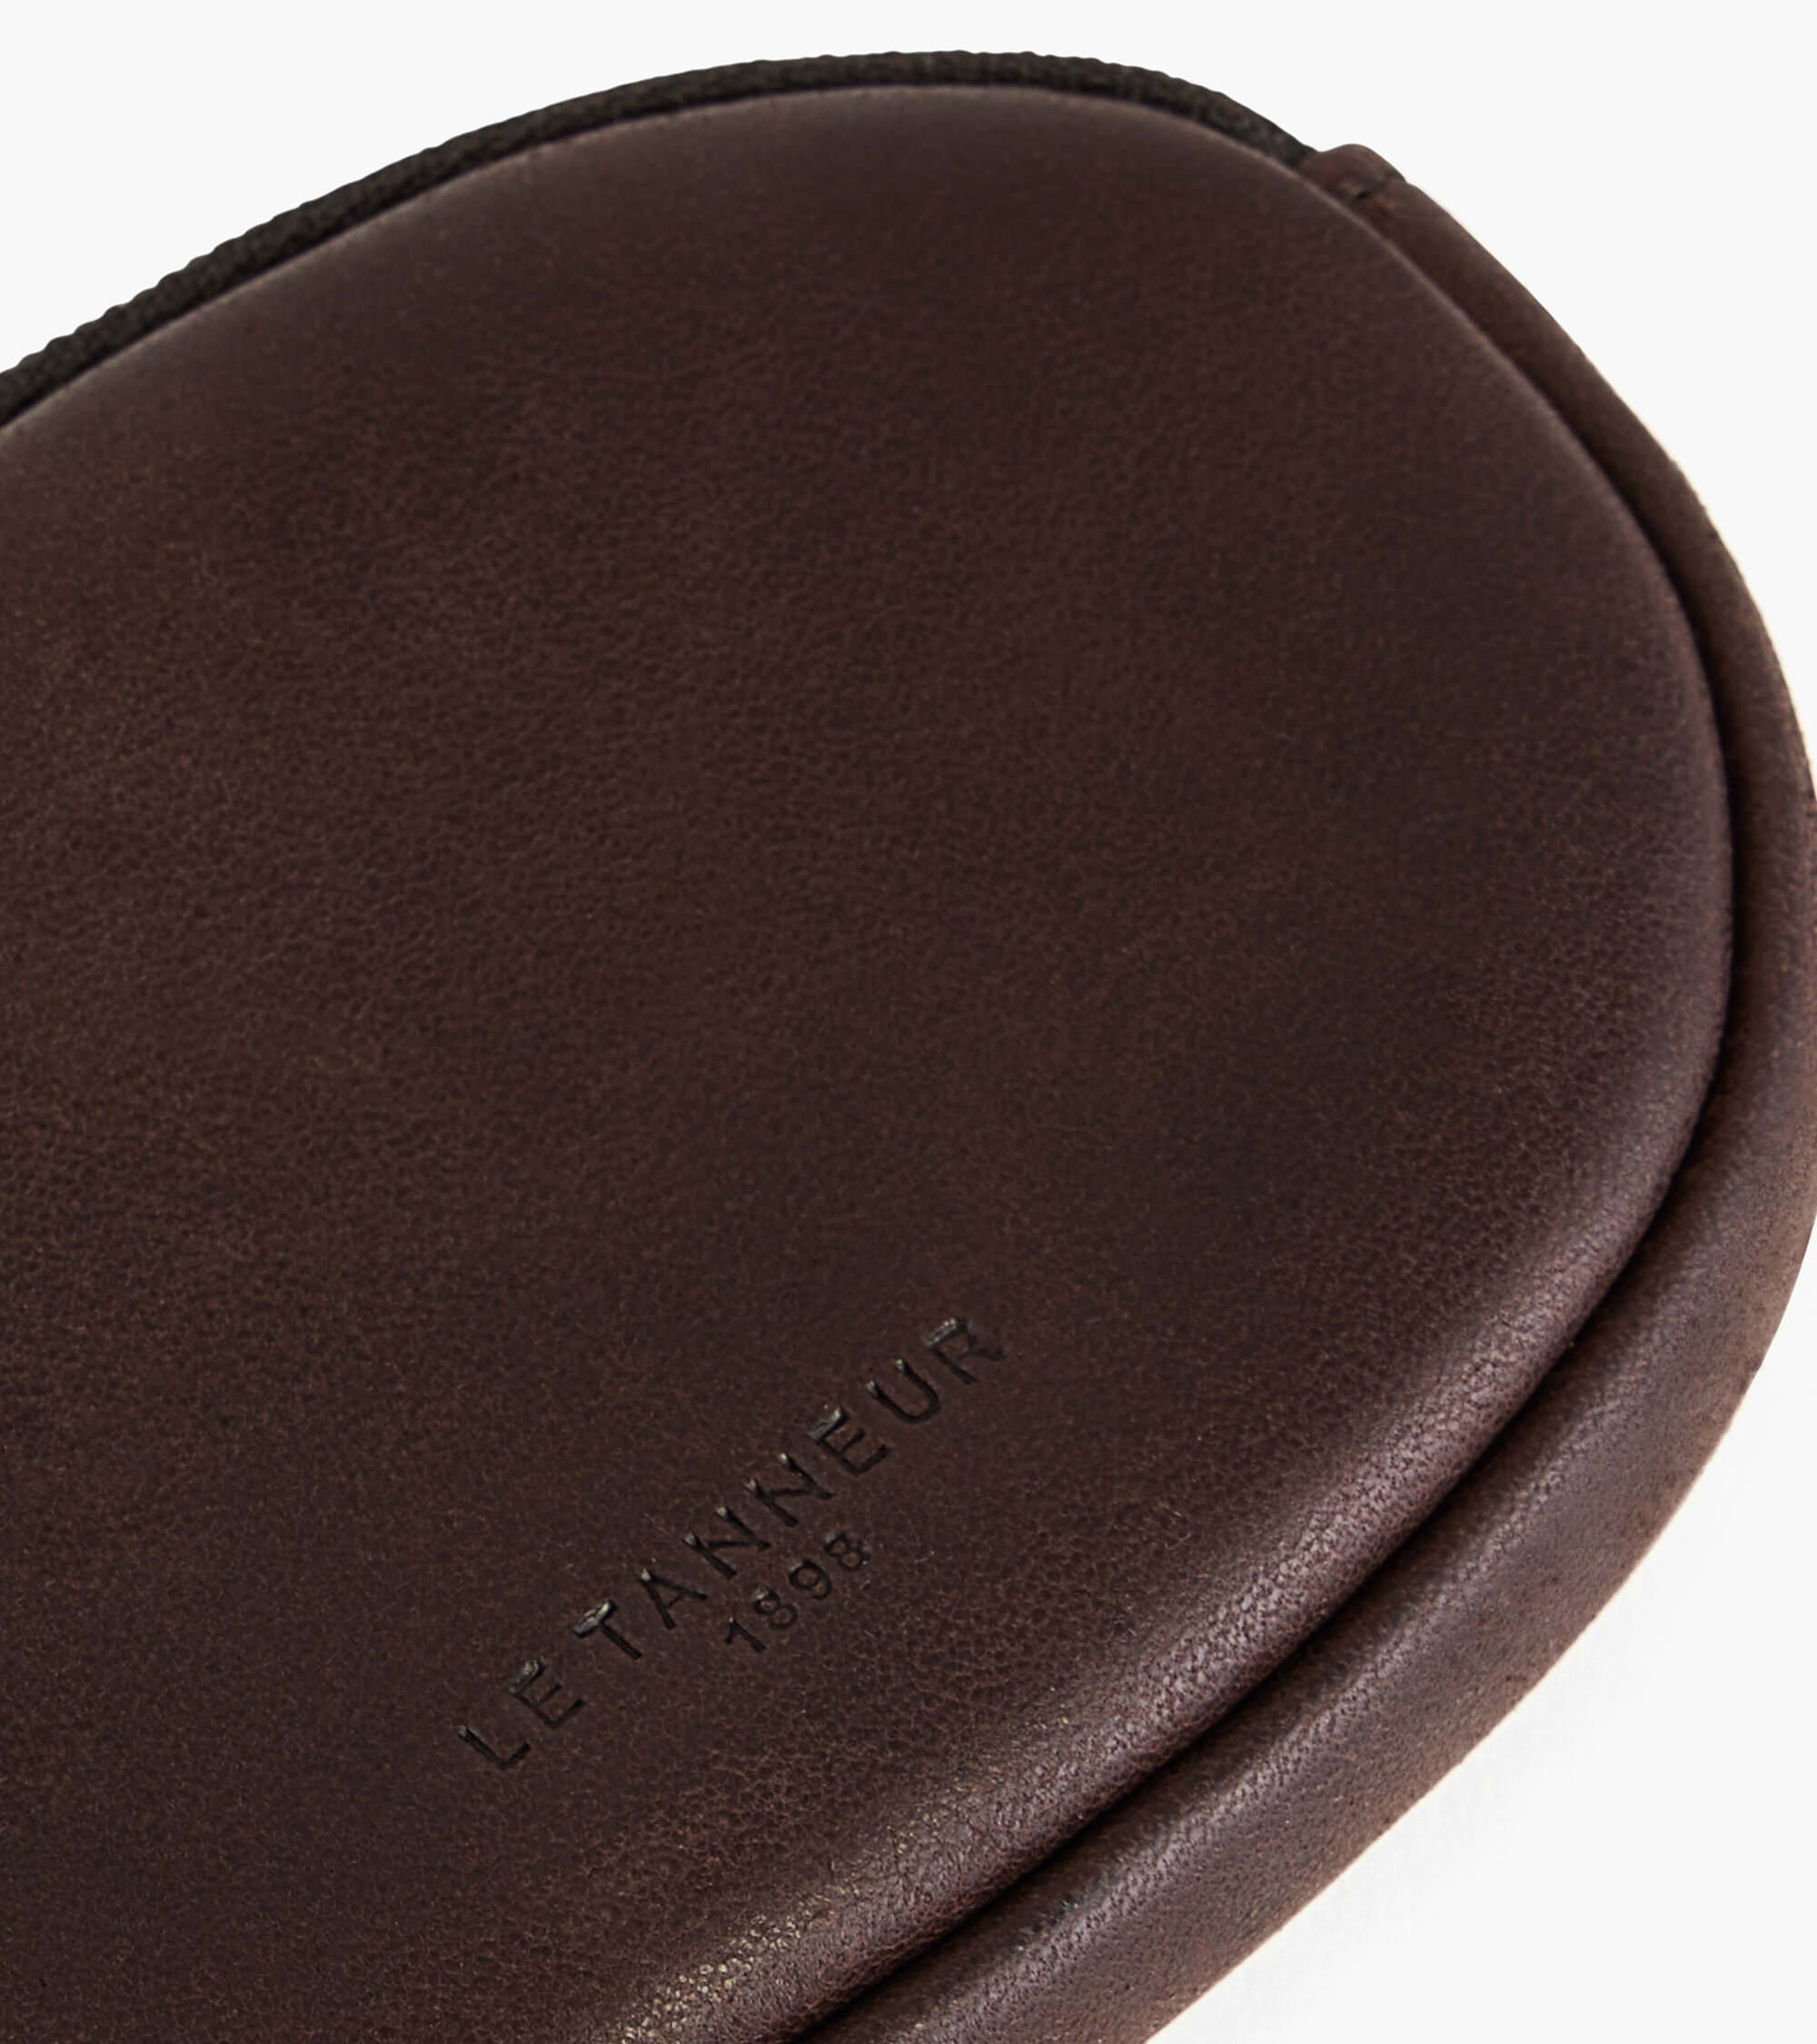 Gary zipped coin purse in oiled leather